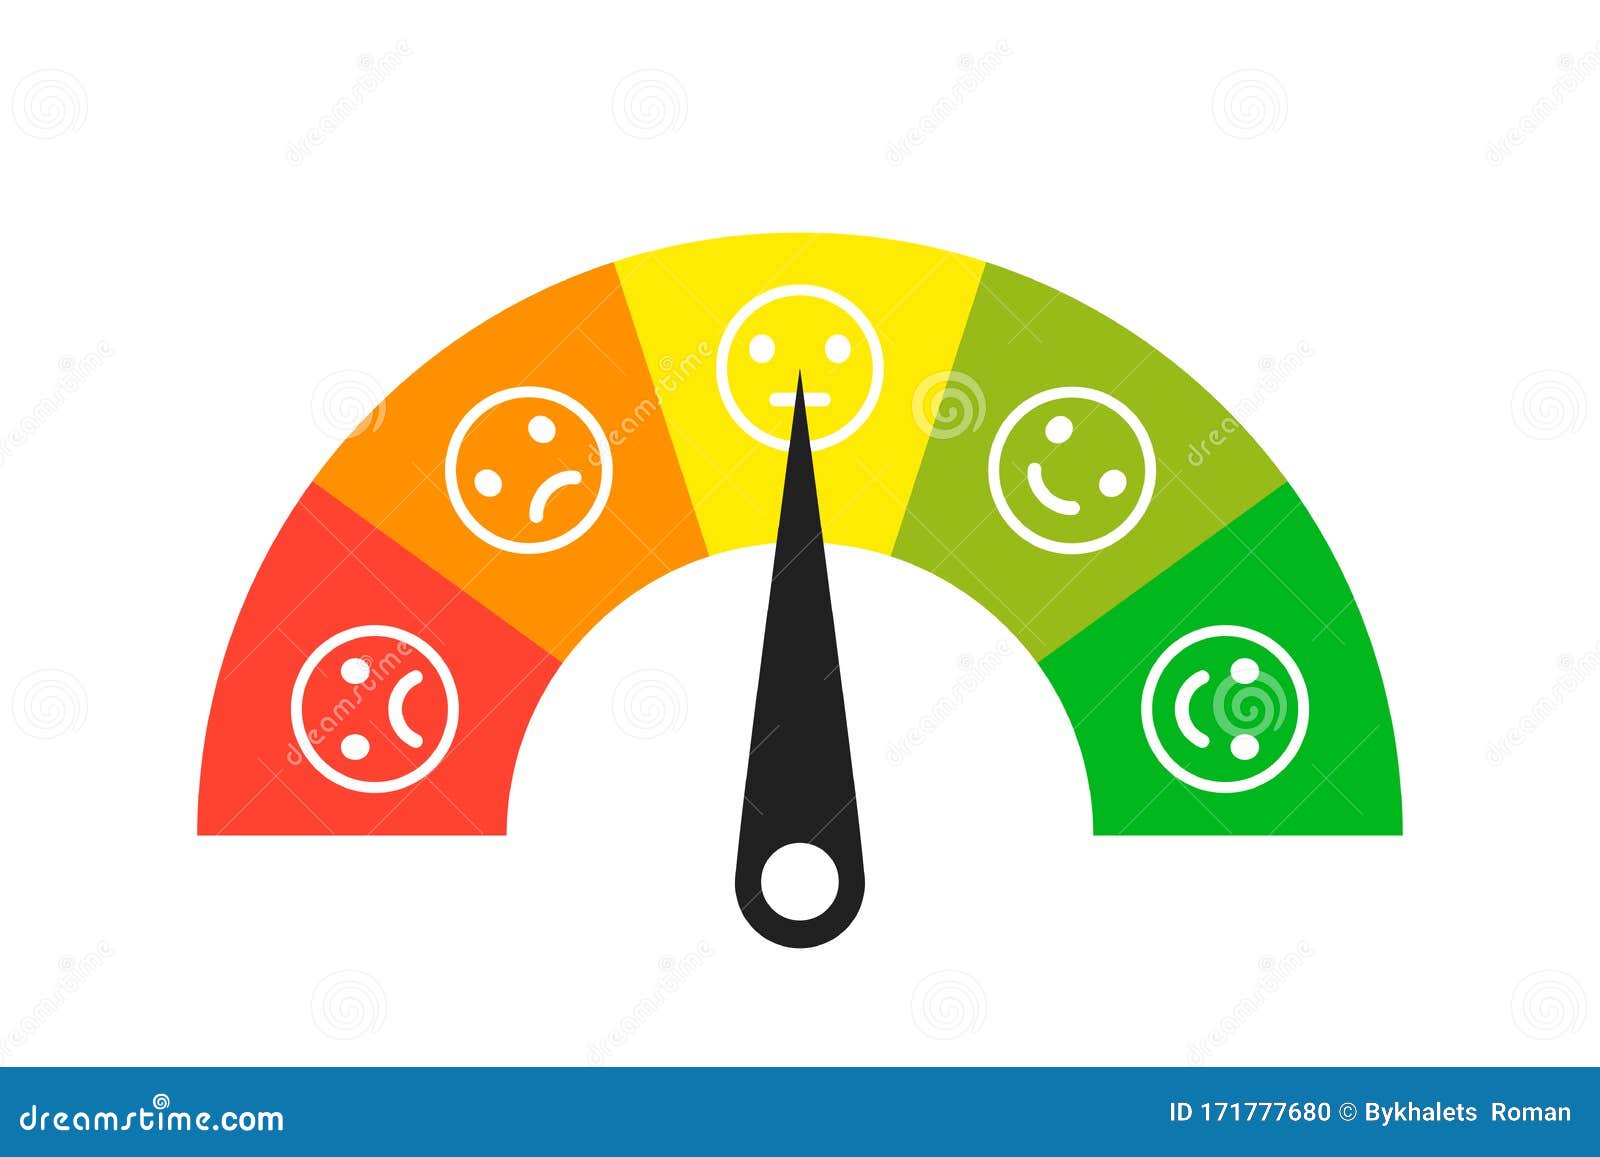 colored scale. gauge. indicator with different colors. emoji faces icons. measuring device tachometer speedometer indicator.